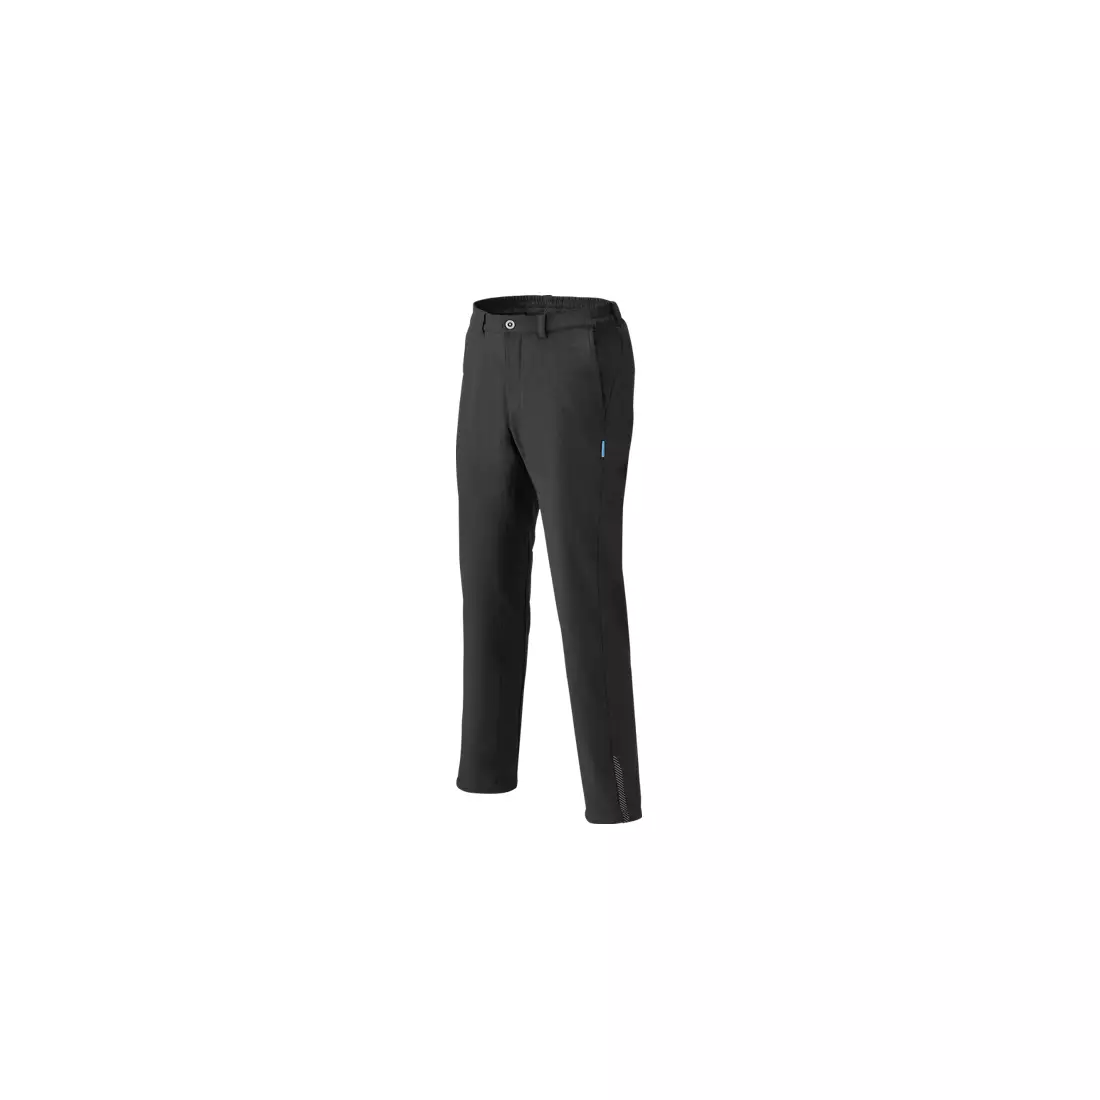 SHIMANO CWPATWLS16UL Insulated Comfort Pants – isolierte Radhose